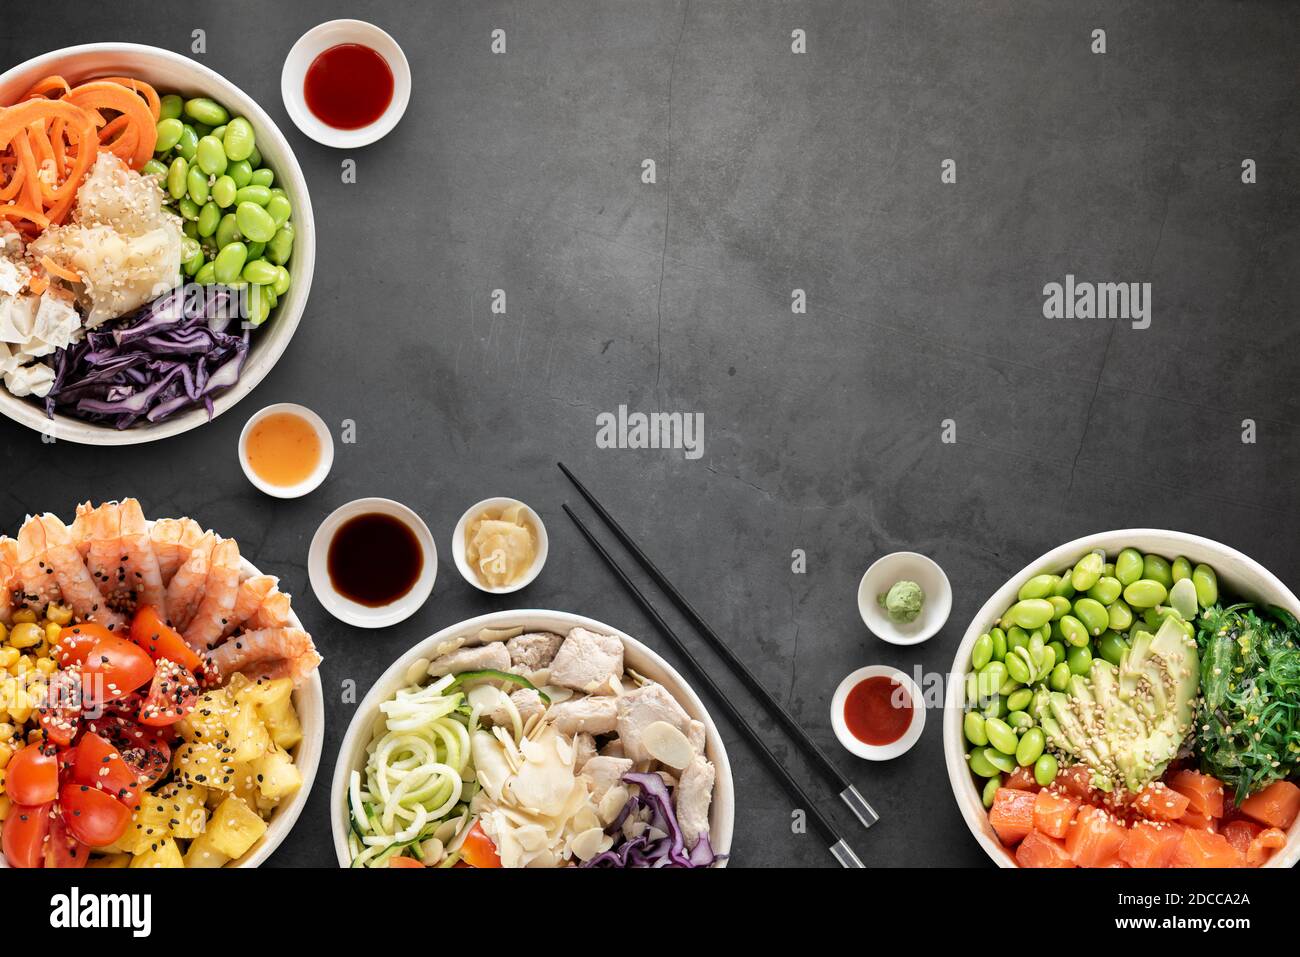 Top view of poke bowls composition with various sauces Stock Photo